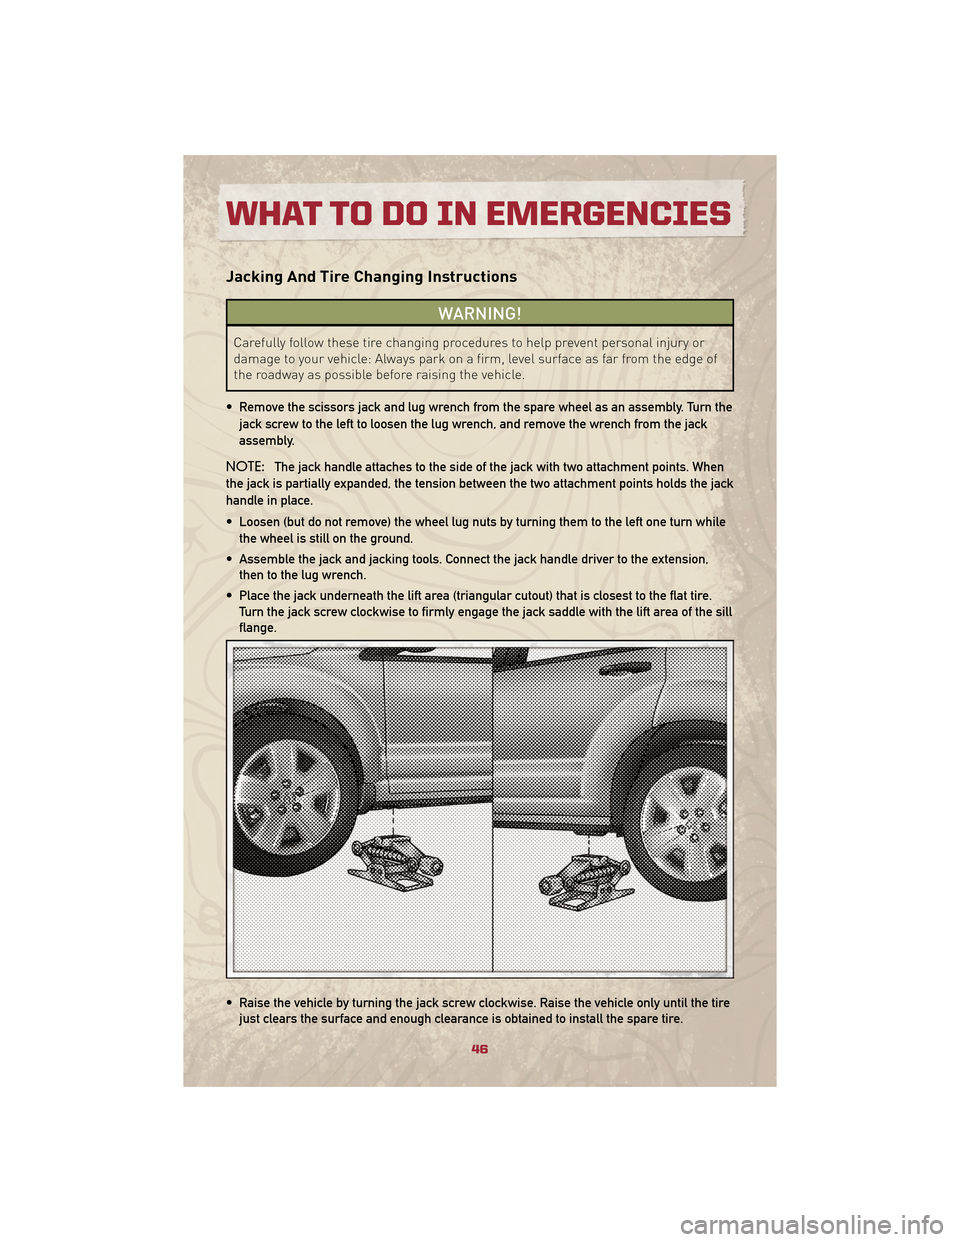 JEEP PATRIOT 2010 1.G User Guide Jacking And Tire Changing Instructions
WARNING!
Carefully follow these tire changing procedures to help prevent personal injury or
damage to your vehicle: Always park on a firm, level surface as far f